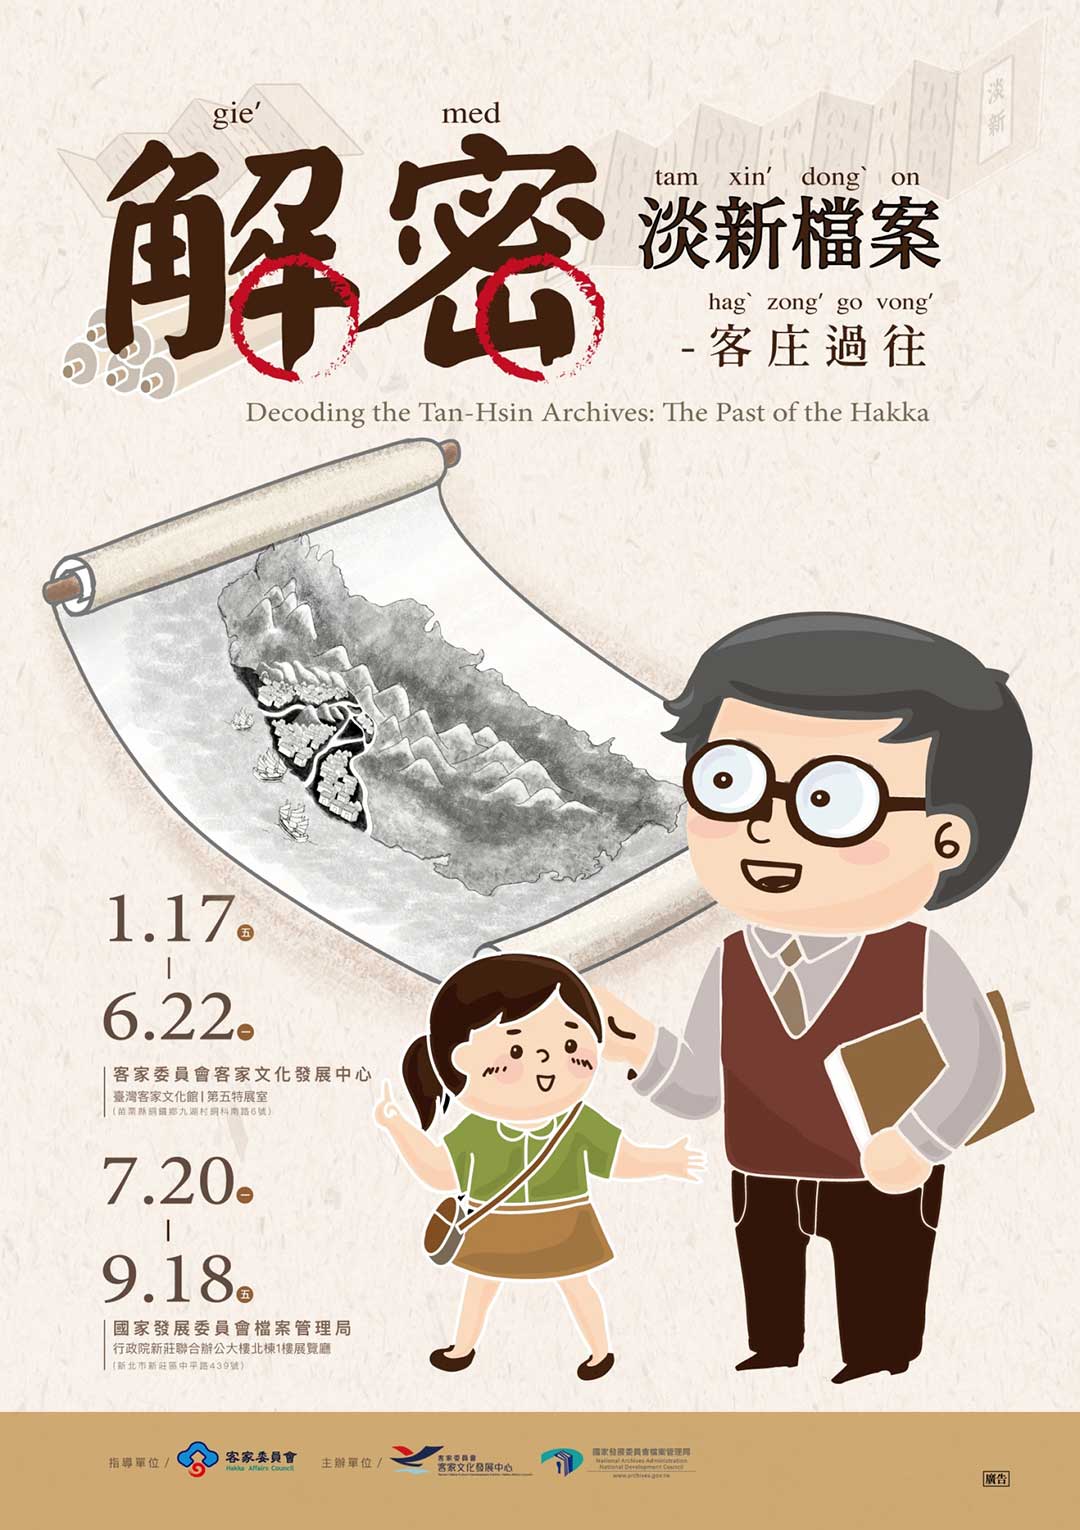 5th Special Exhibition Hall – Special exhibition of “Decoding the Tan-Hsin Archives: The Past of the Hakka” 主圖